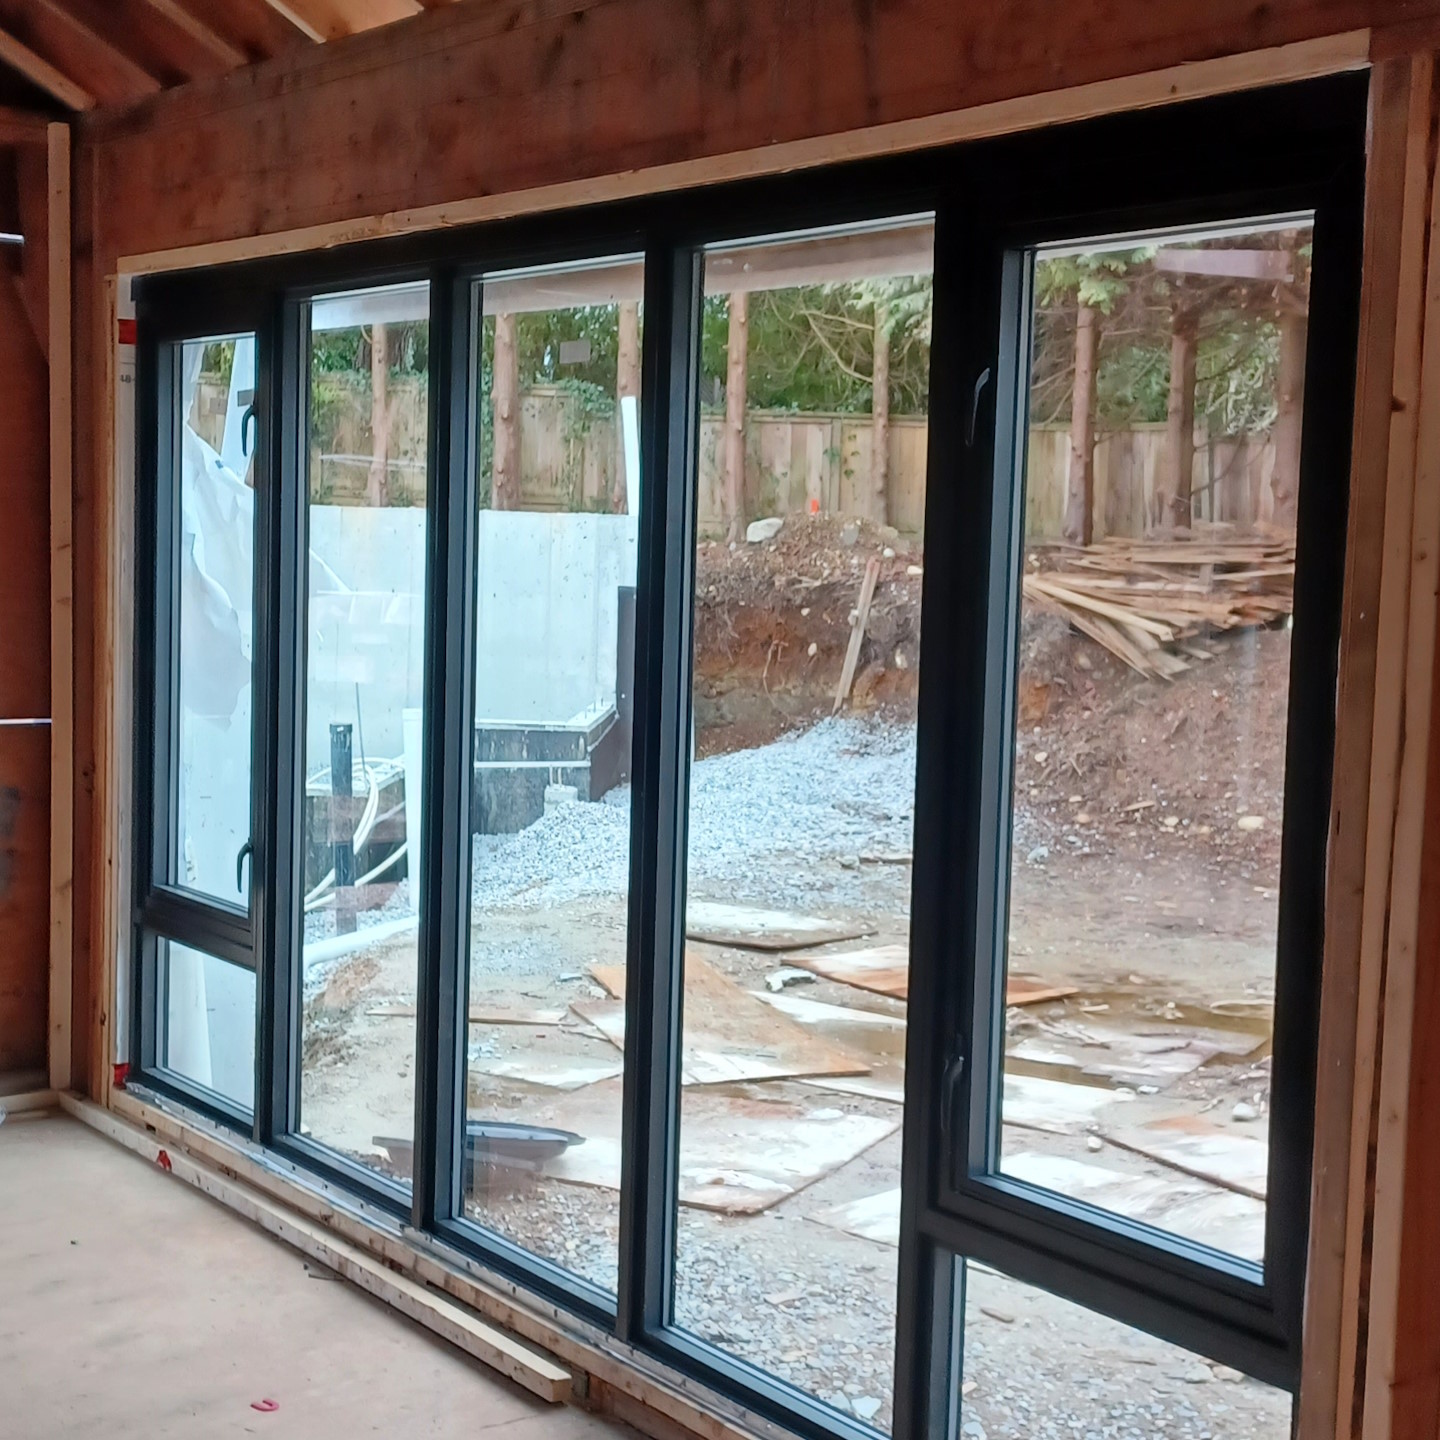 A large seven-part window, recently installed.